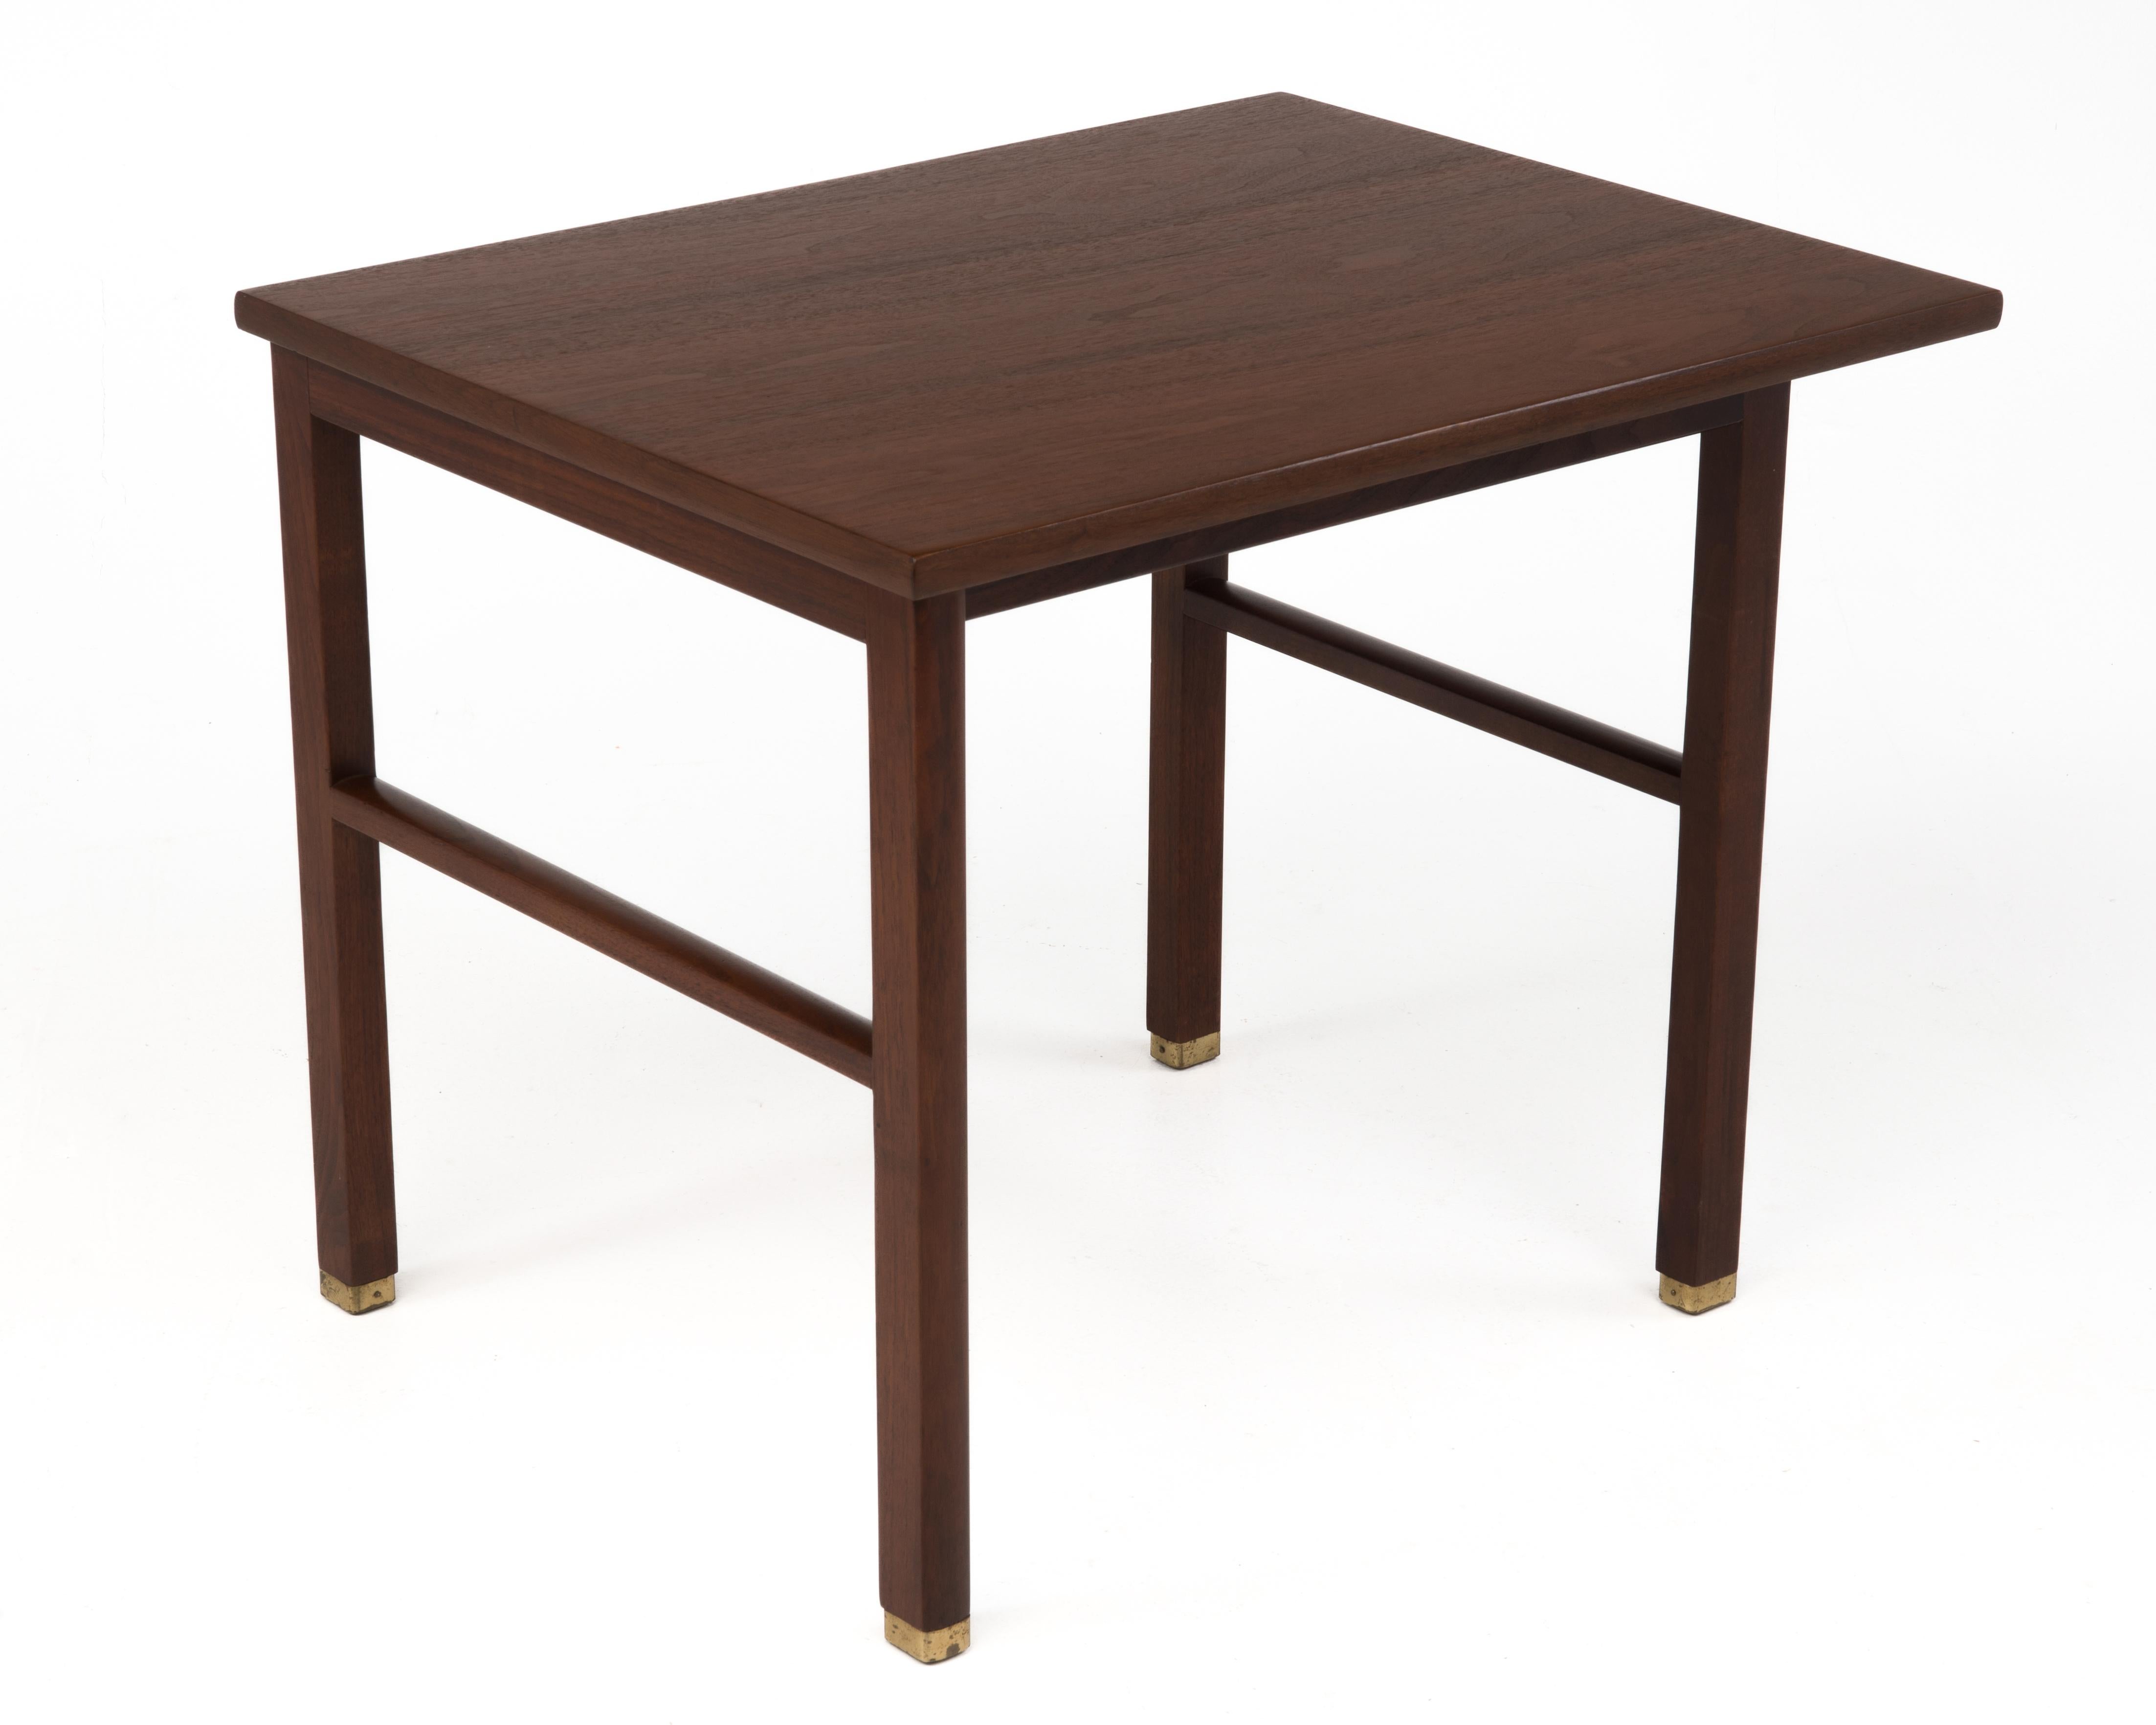 A Mid-Century end or side table by Edward Wormley for Dunbar, c. 1960's. The table features a cantilevered top and brass feet. It retains the original Dunbar brass tag.